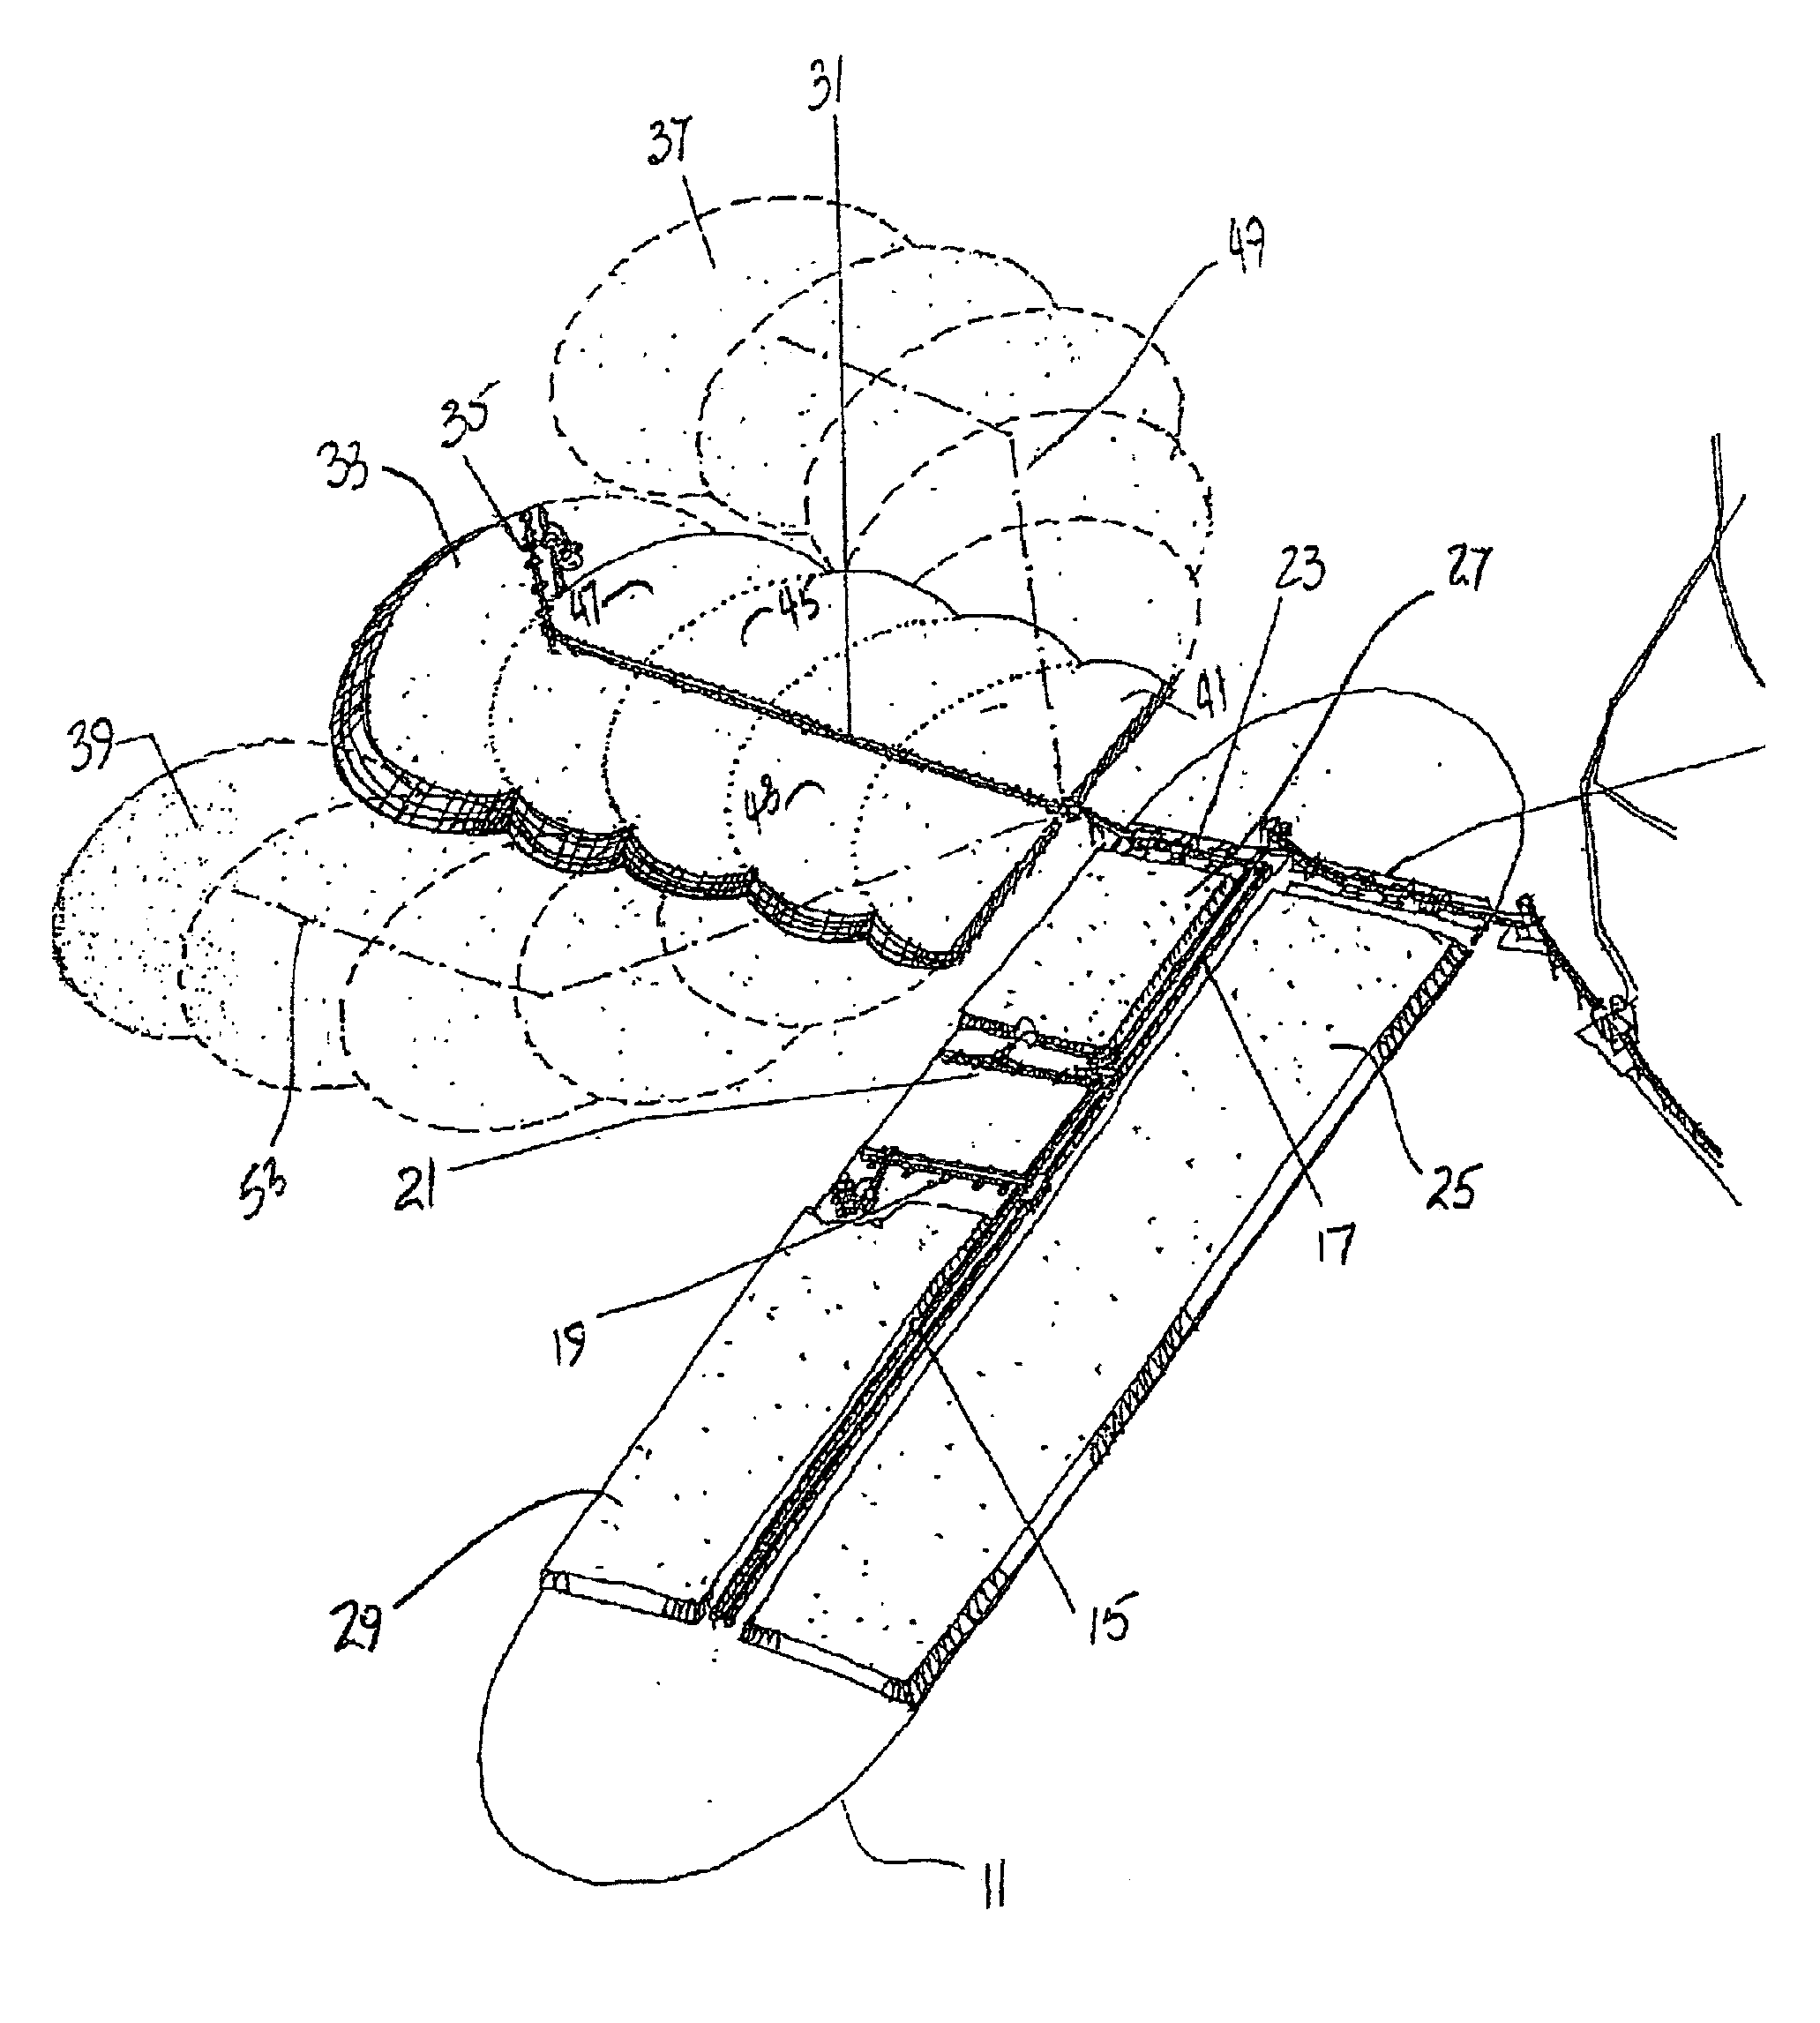 Method for multiple lift stacking using mobile conveyor system